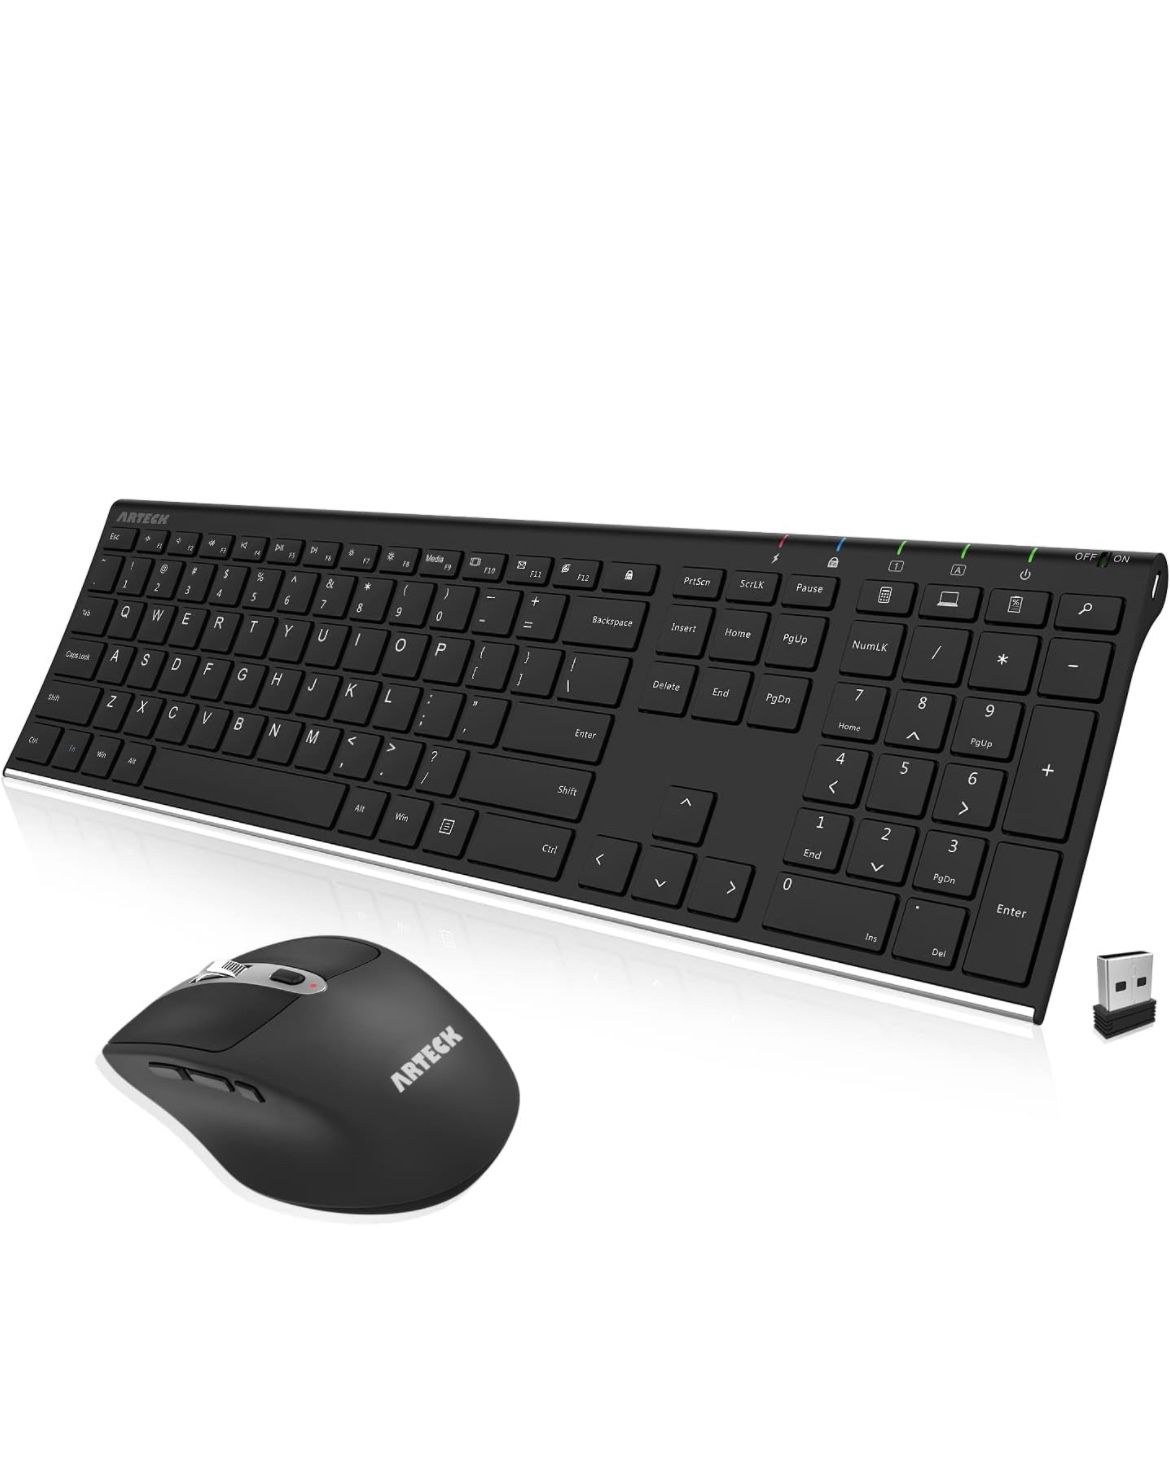 Arteck 2.4G Wireless Keyboard and Mouse Combo Stainless Full Size Keyboard and Ergonomic Mouse with Side Buttons for Computer Desktop PC Laptop and Wi